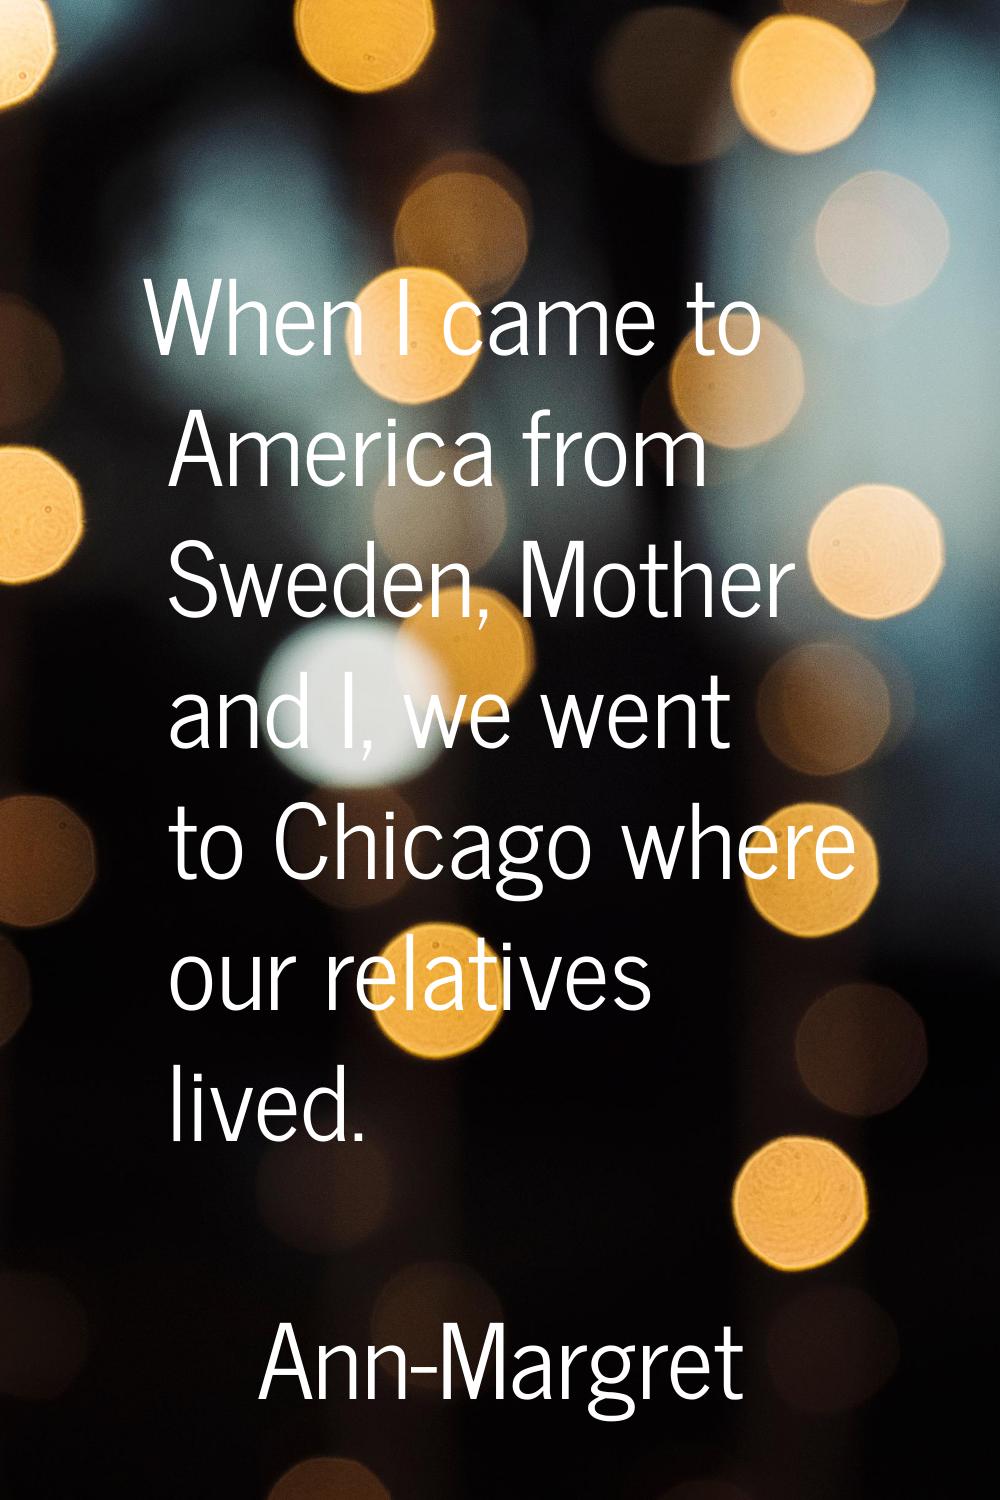 When I came to America from Sweden, Mother and I, we went to Chicago where our relatives lived.